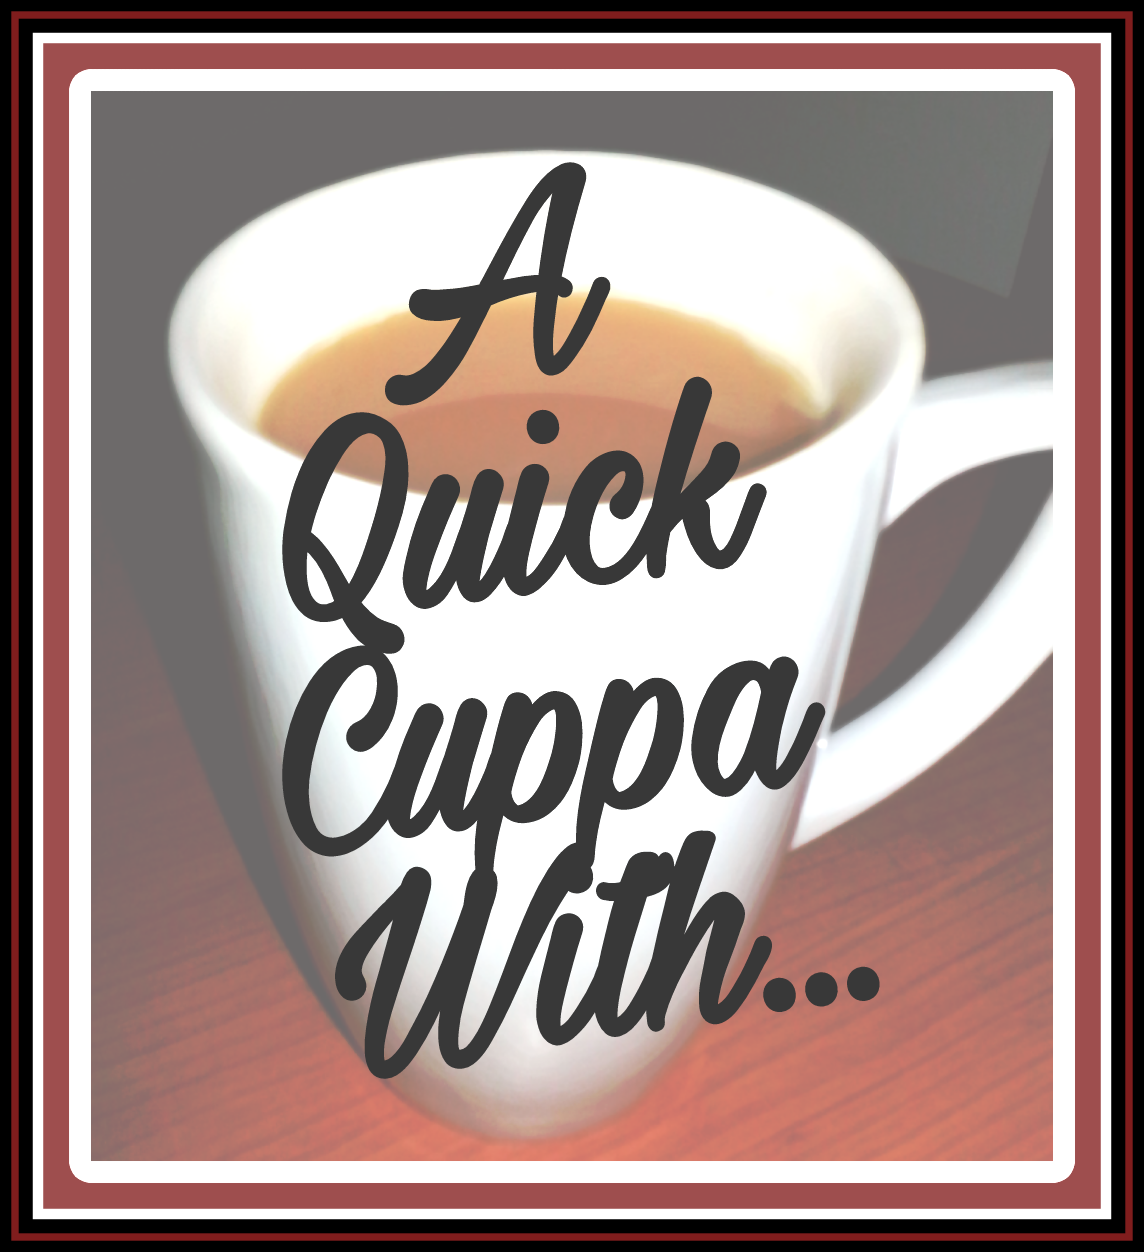 A Quick Cuppa With, A Slice of Life Wales, blogger, interview, Q and A, guest post, Living Life Our Way